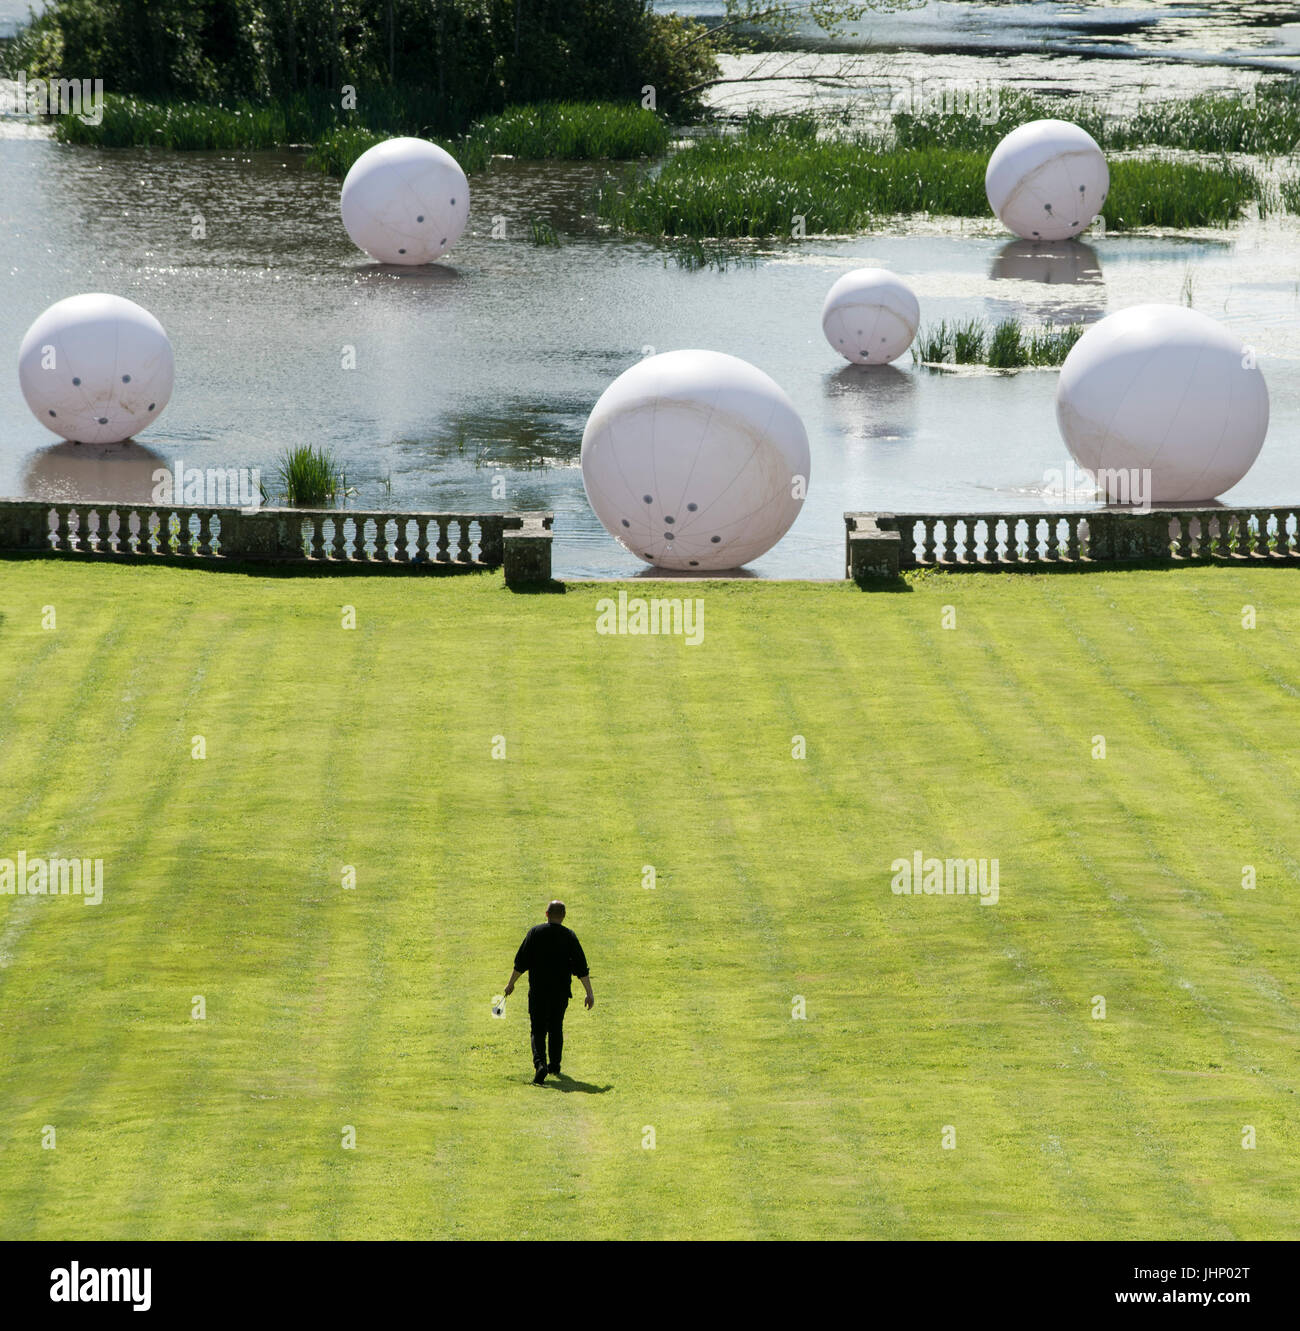 Friday 14th of July 2017: Mellerstain House, Kelso, Scottish Borders. Artist Steve Messam launches the opening of the Borders Sculpture Park with three installations in the grounds of Mellerstain House in the Scottish Borders. Spiked, Scatter and Towered.   On the lake at the foot of the lawn a collection of pure white spheres float on the surface of the water. ‘Scatter’ is a series of spheres which disrupt the wide open space of the water and play with its scale, surface and light. The balls, at a variety of sizes from 1m to 4m diameter bring a sense of scale to the landscape. The pieces appe Stock Photo